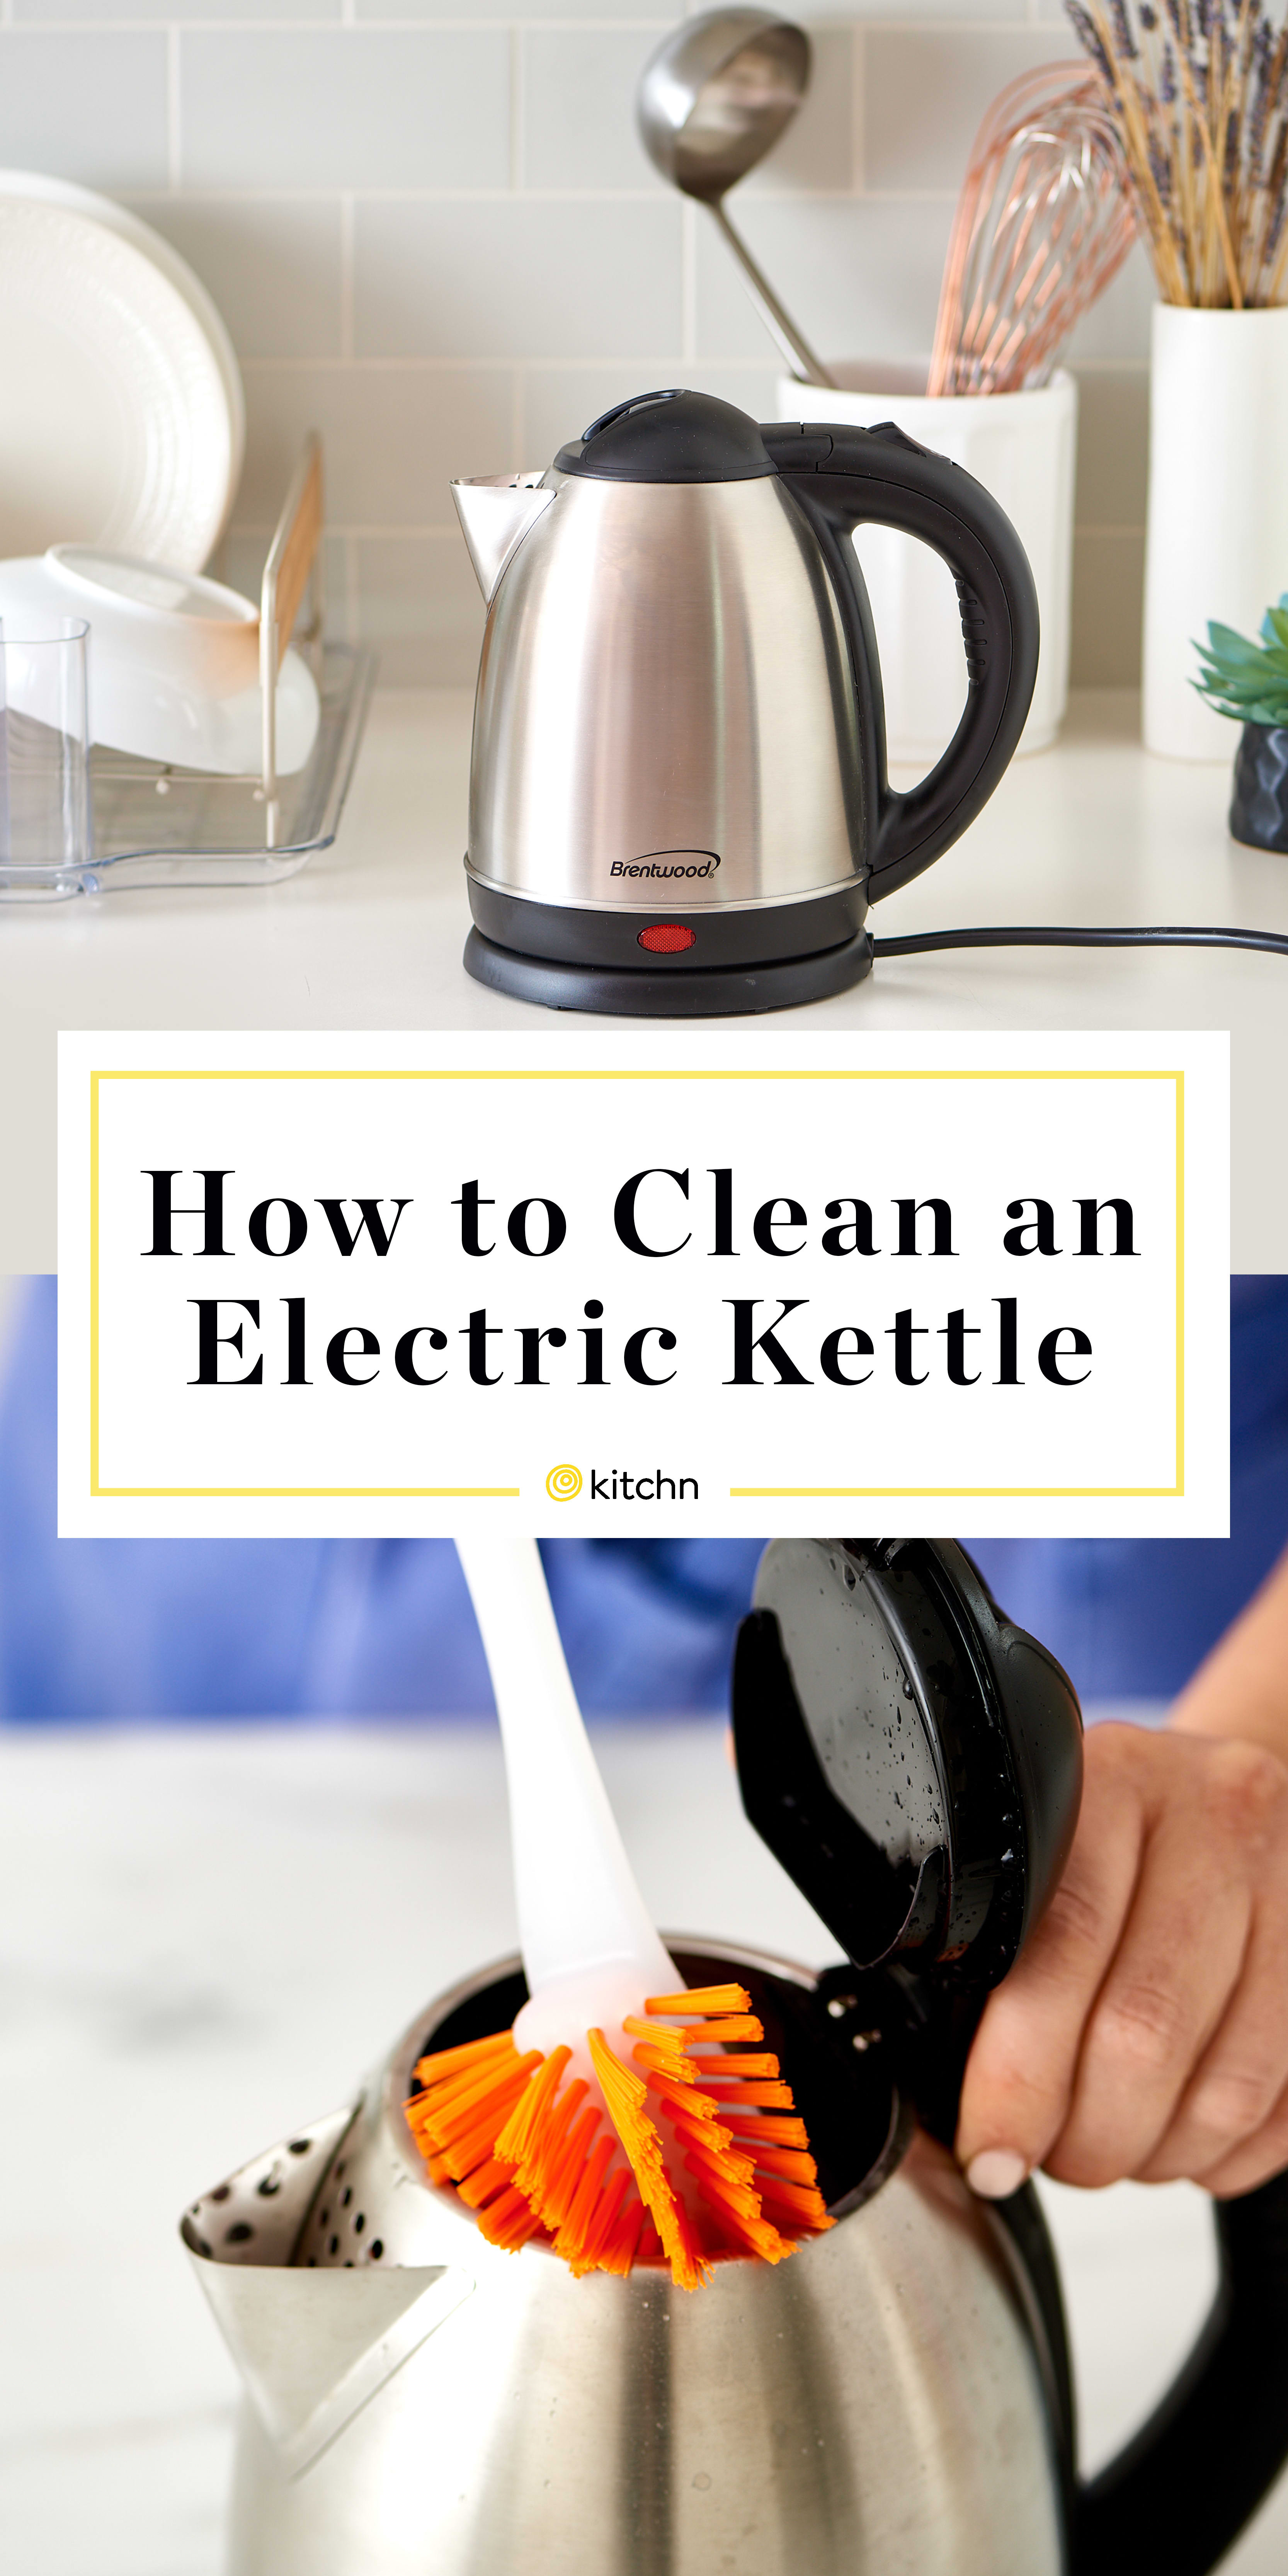 koel Formulering Dij How To Clean an Electric Kettle | Kitchn